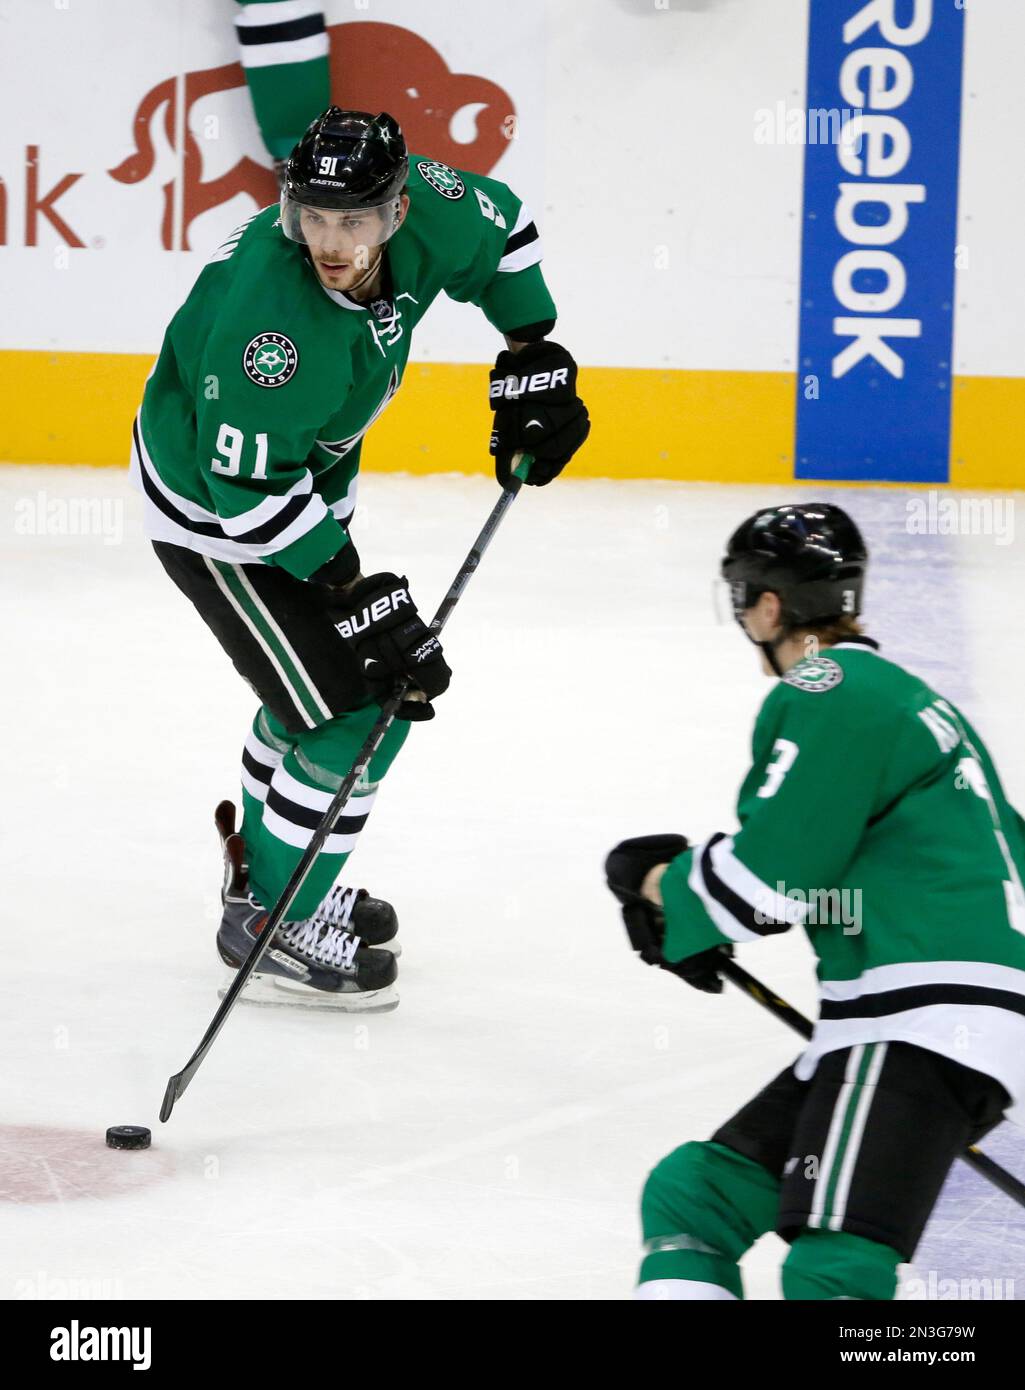 Will Tyler Seguin Score a Goal Against the Blue Jackets on October 30?